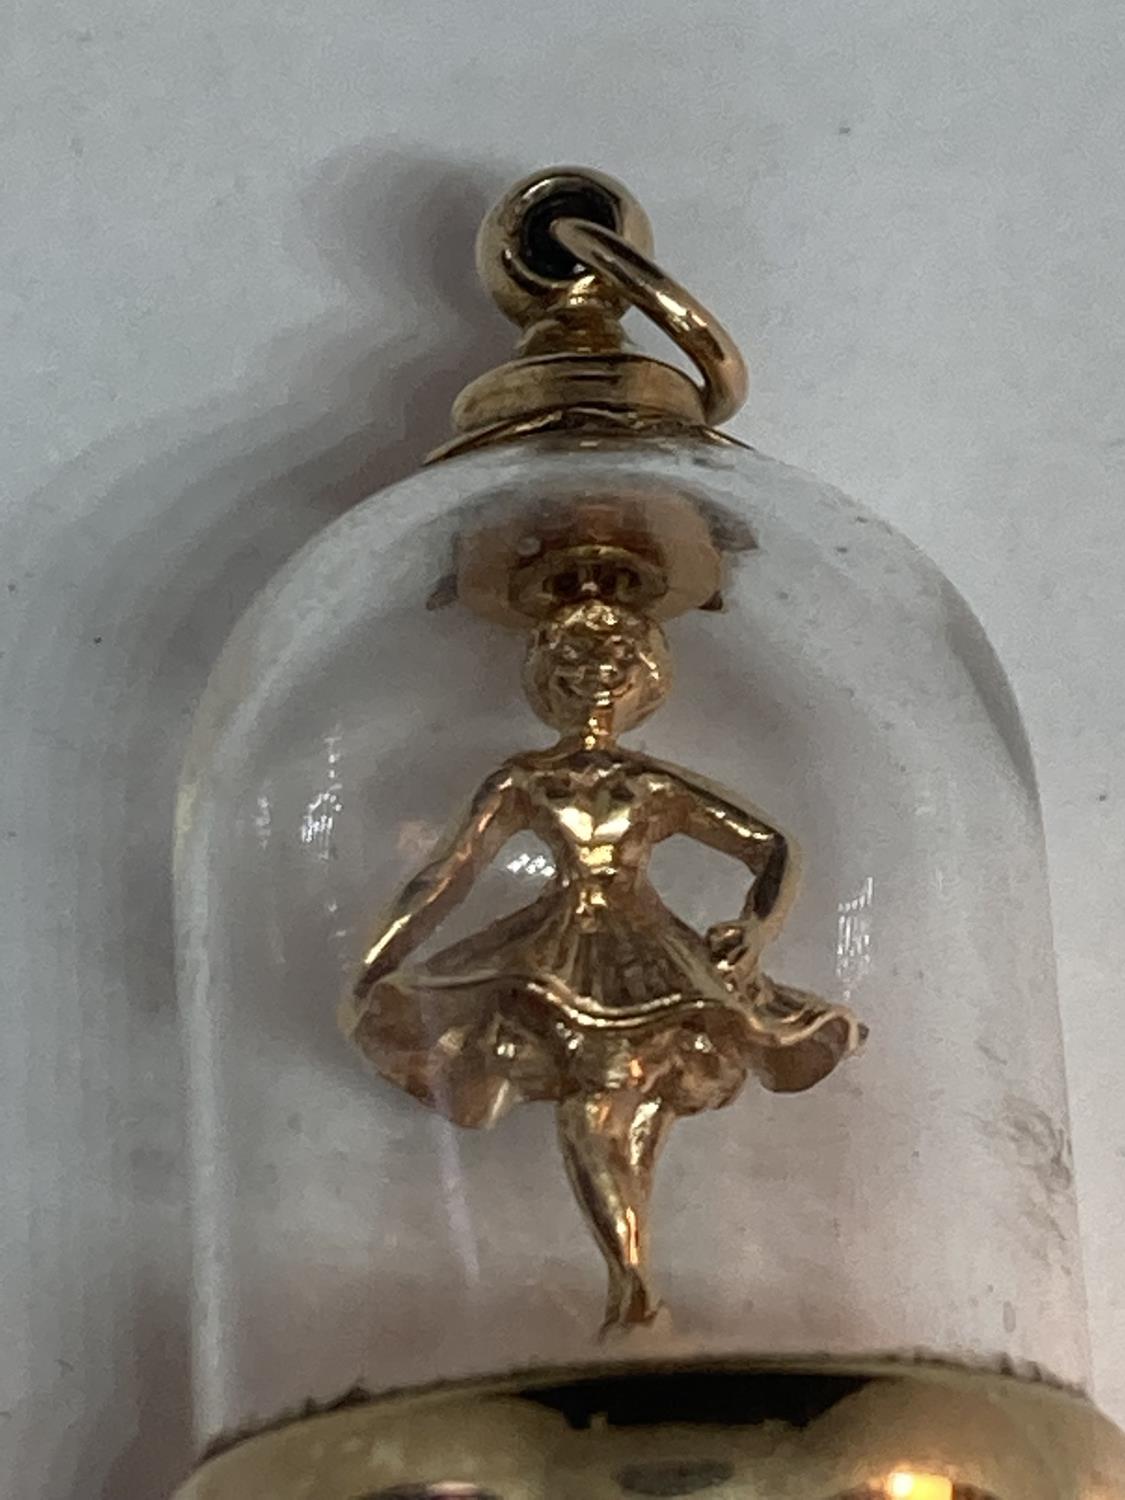 A 9 CARAT GOLD PENDANT WITH A BALLERINA IN A DOME GROSS WEIGHT 13.9 GRAMS - Image 4 of 4